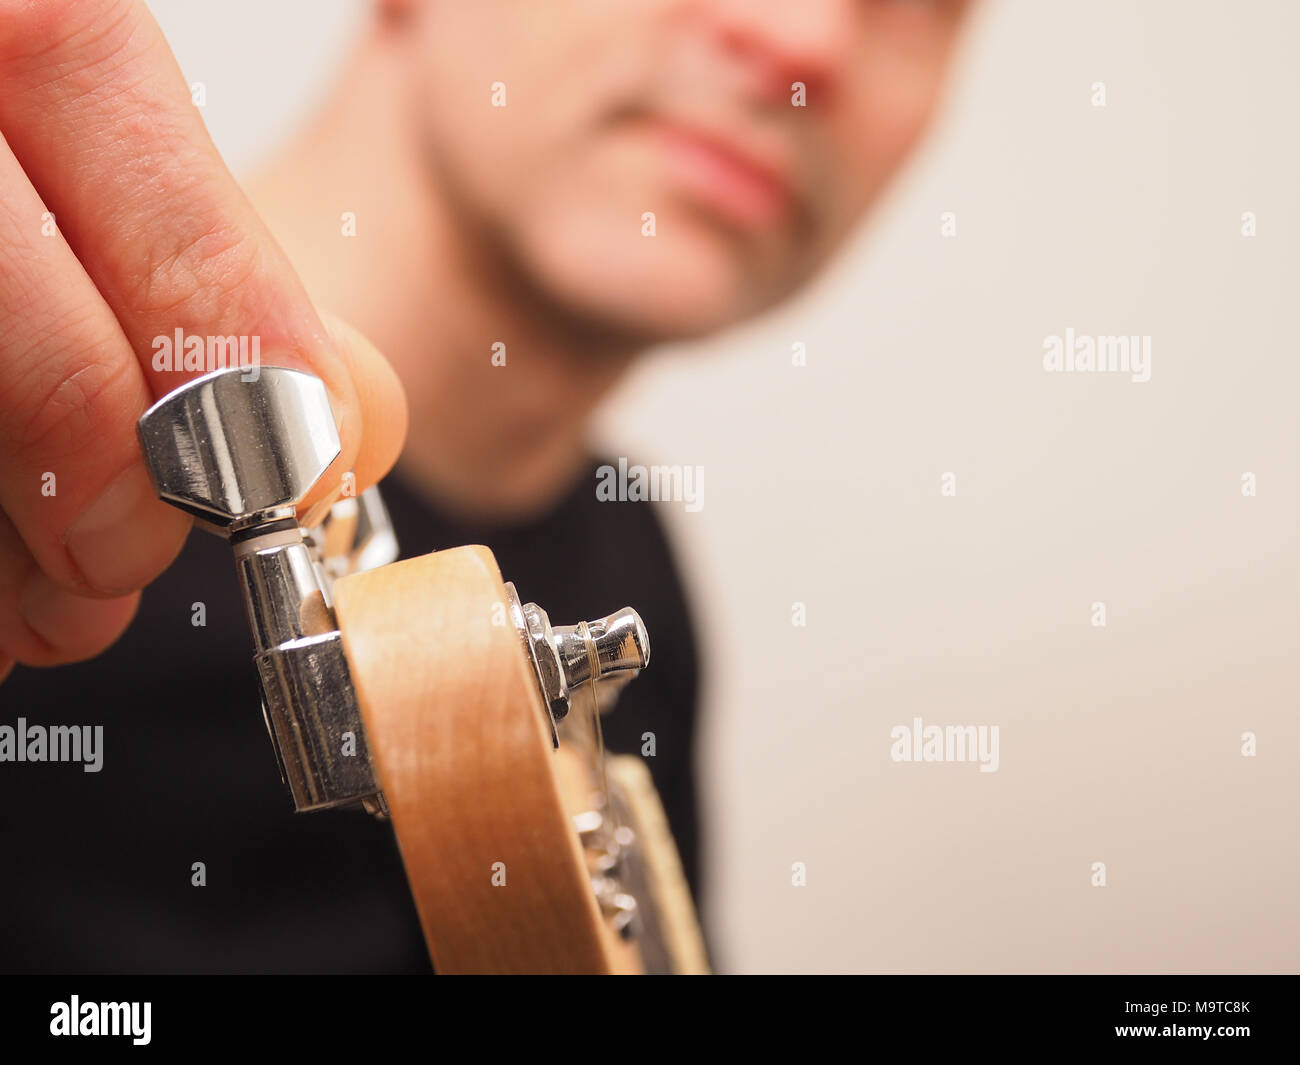 Young guitarist tuning his electric guitar in a studio, selective focus on the machine head of the guitar Stock Photo